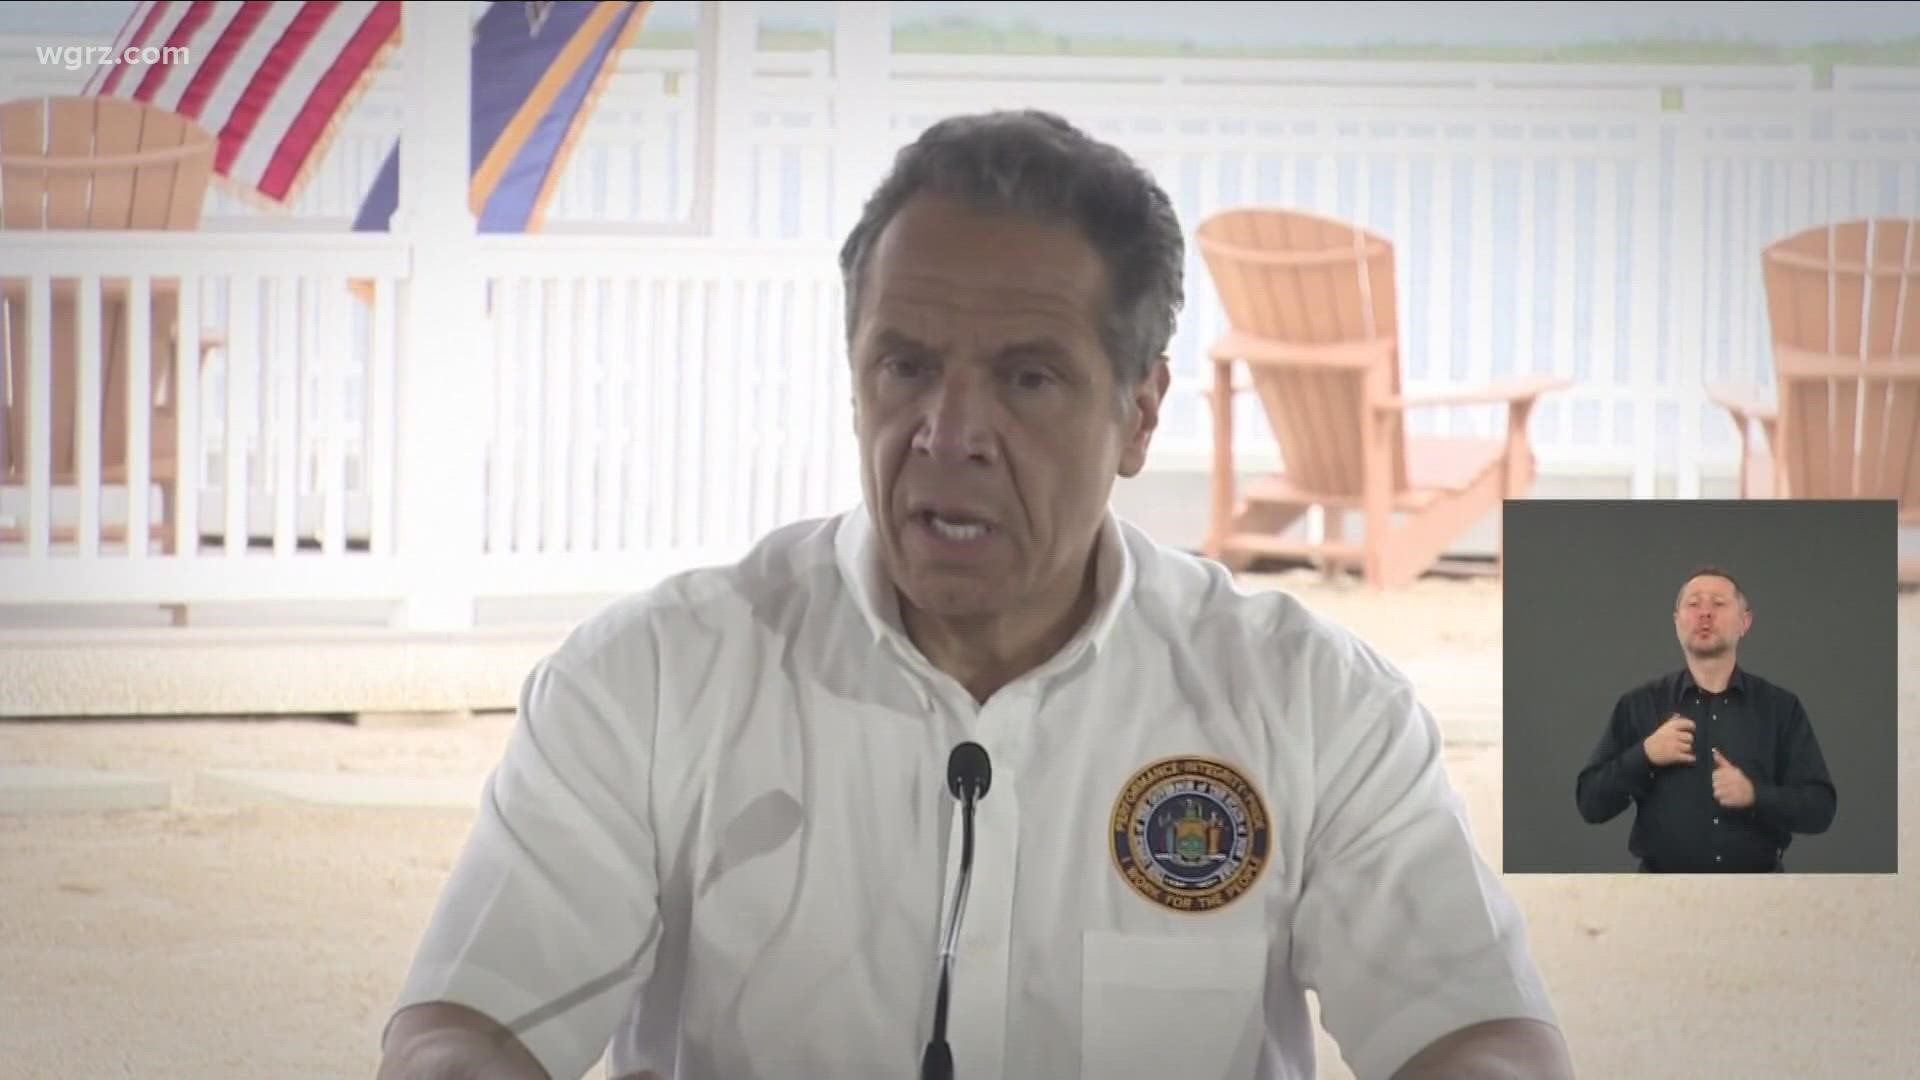 Misdemeanor complaint filed against Andrew Cuomo